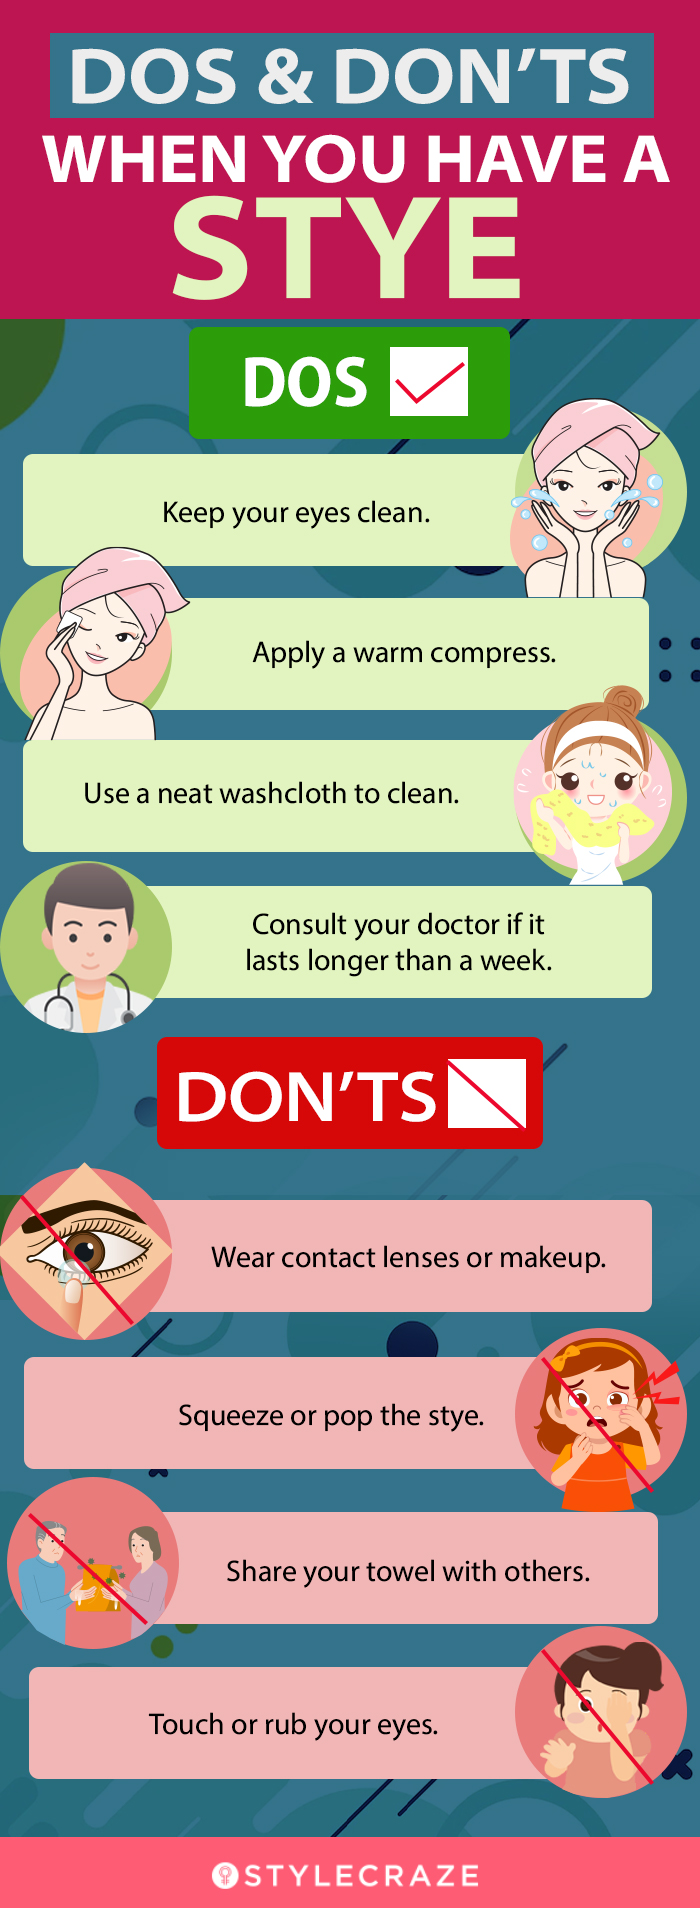 do’s & don’ts when you have a stye (infographic)